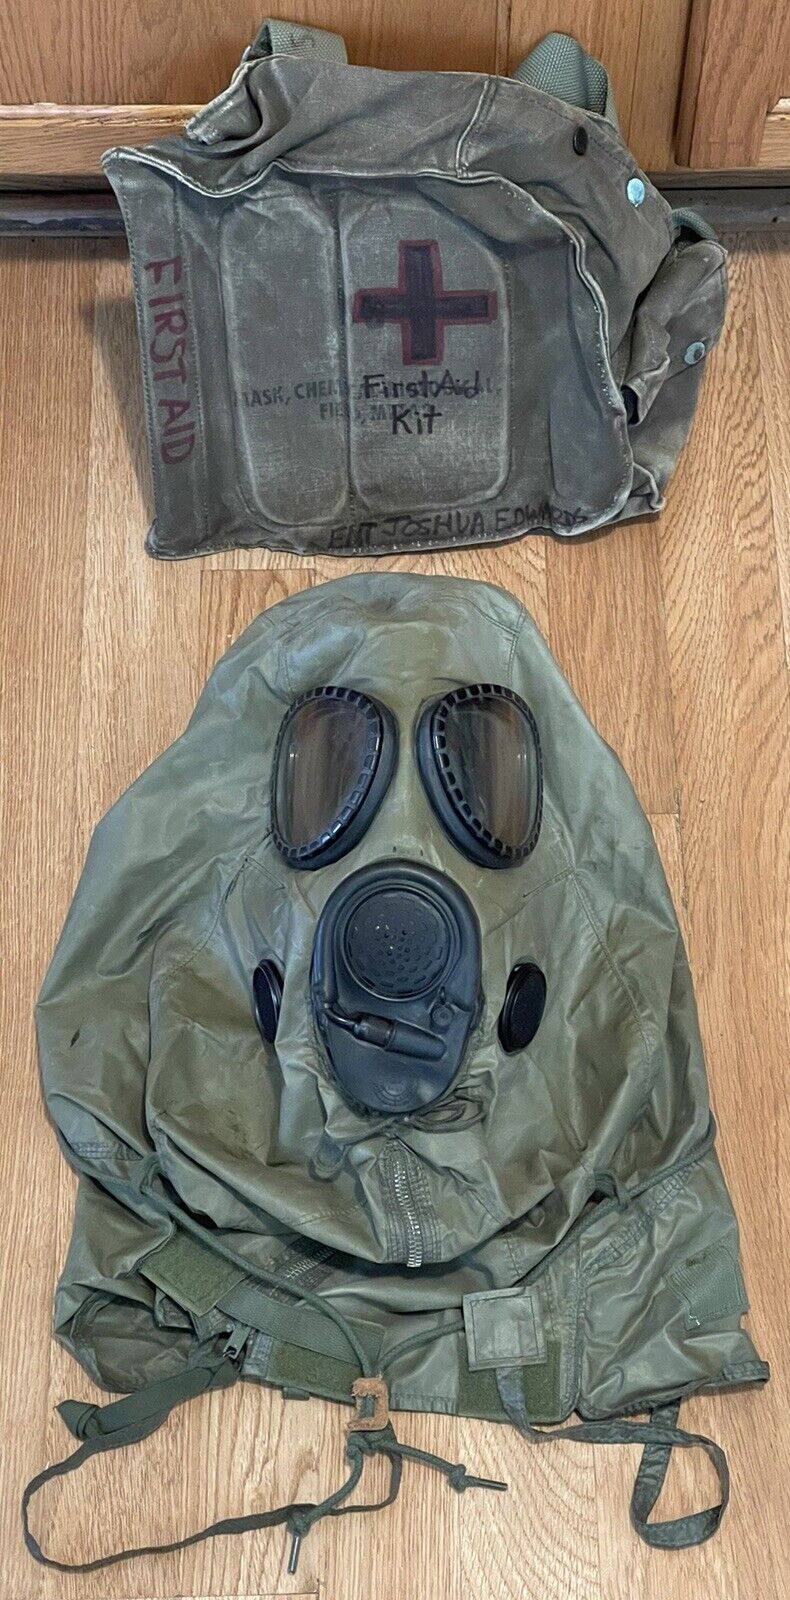 US M17 Field Series Protective Biological Chemical Gas Mask Hood w/ Filter